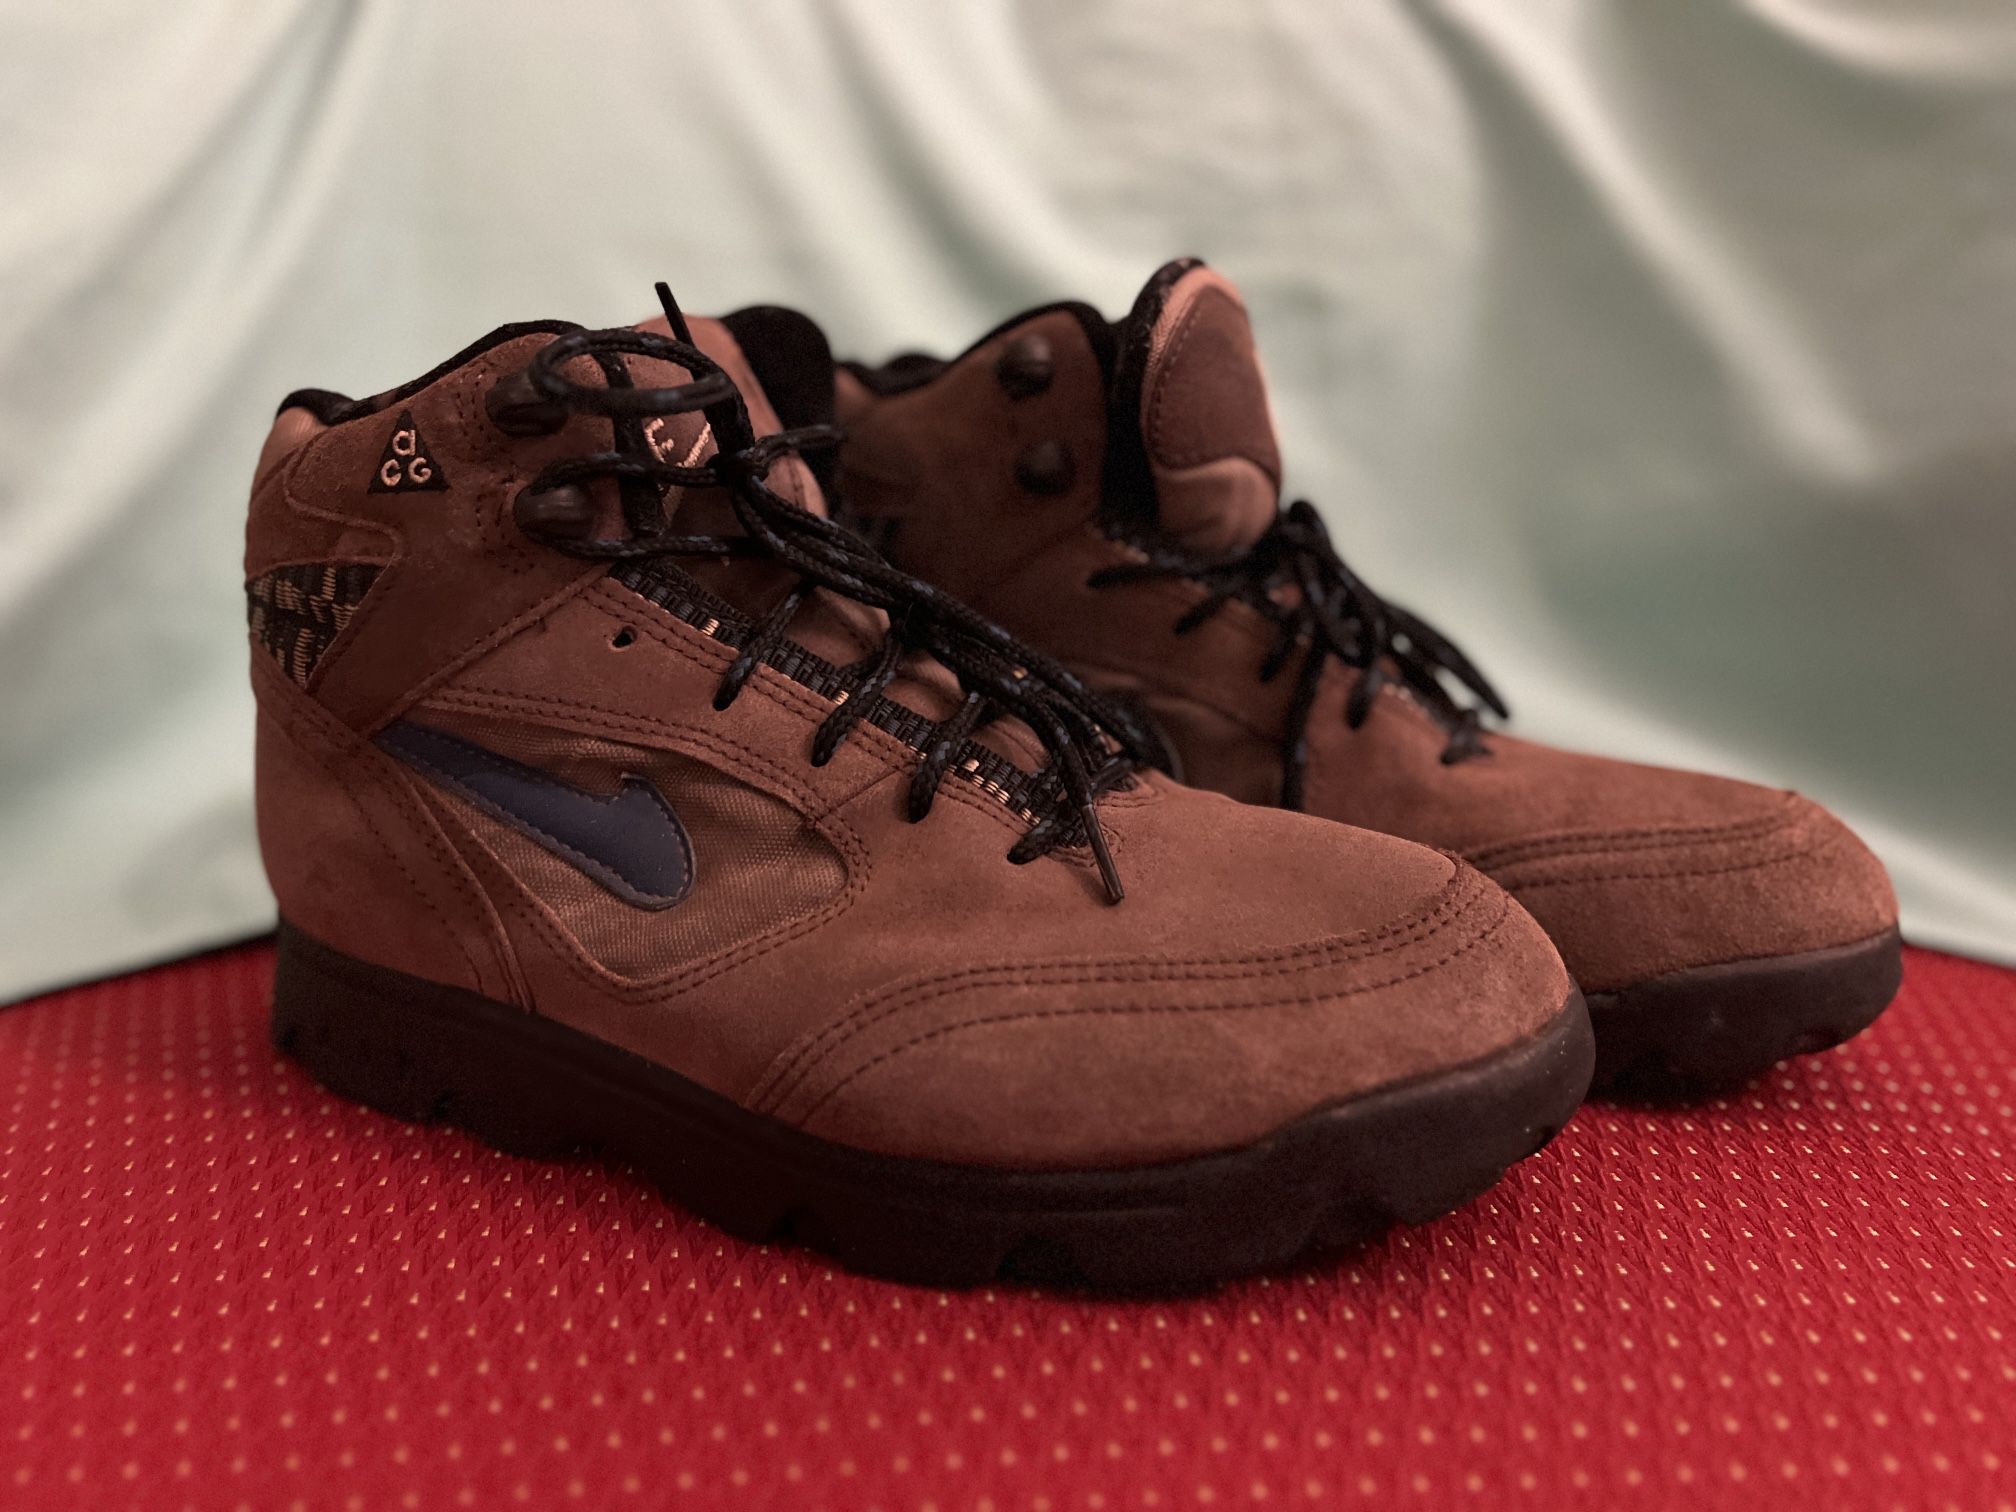 Nike ACG Women's Hiking Boots Size 10 for Sale in Woodway, WA - OfferUp